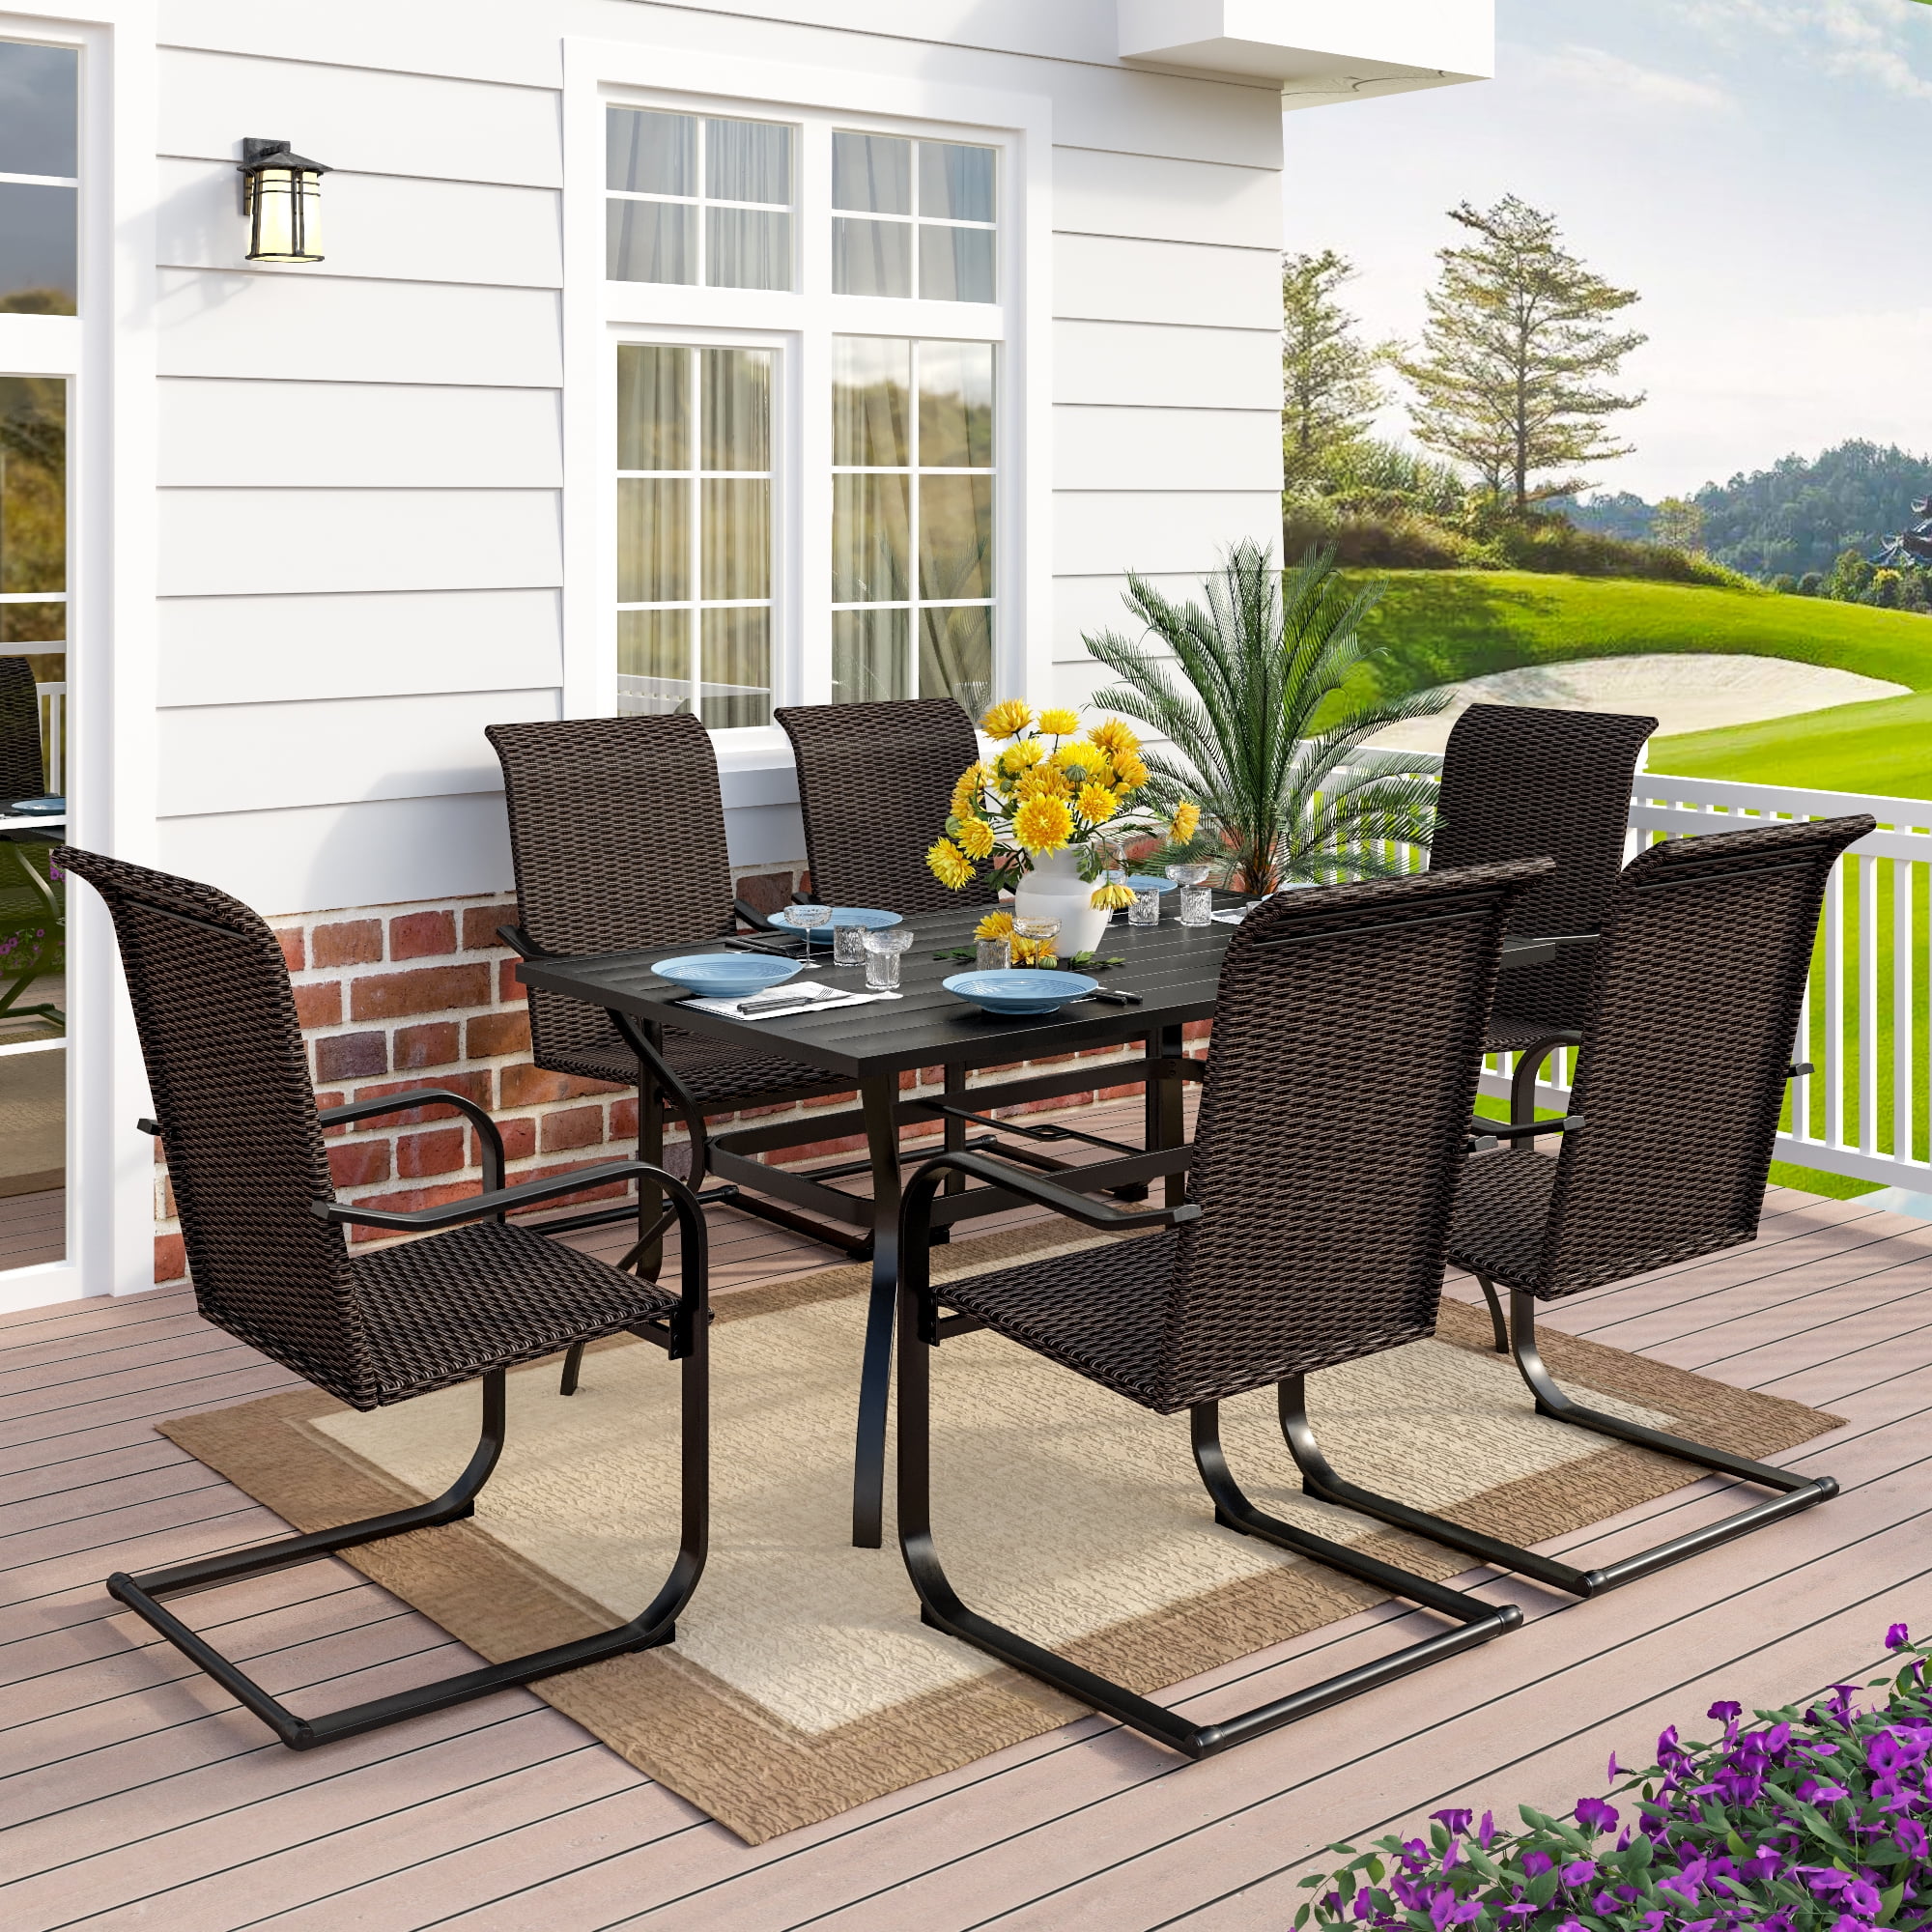 6 Spring Motion Chairs with Cushion Beige 1 Rectangular Expandable Table MFSTUDIO 7PCS Outdoor Patio Dining Set Porch Lawn Backyard Garden Furniture Sets 